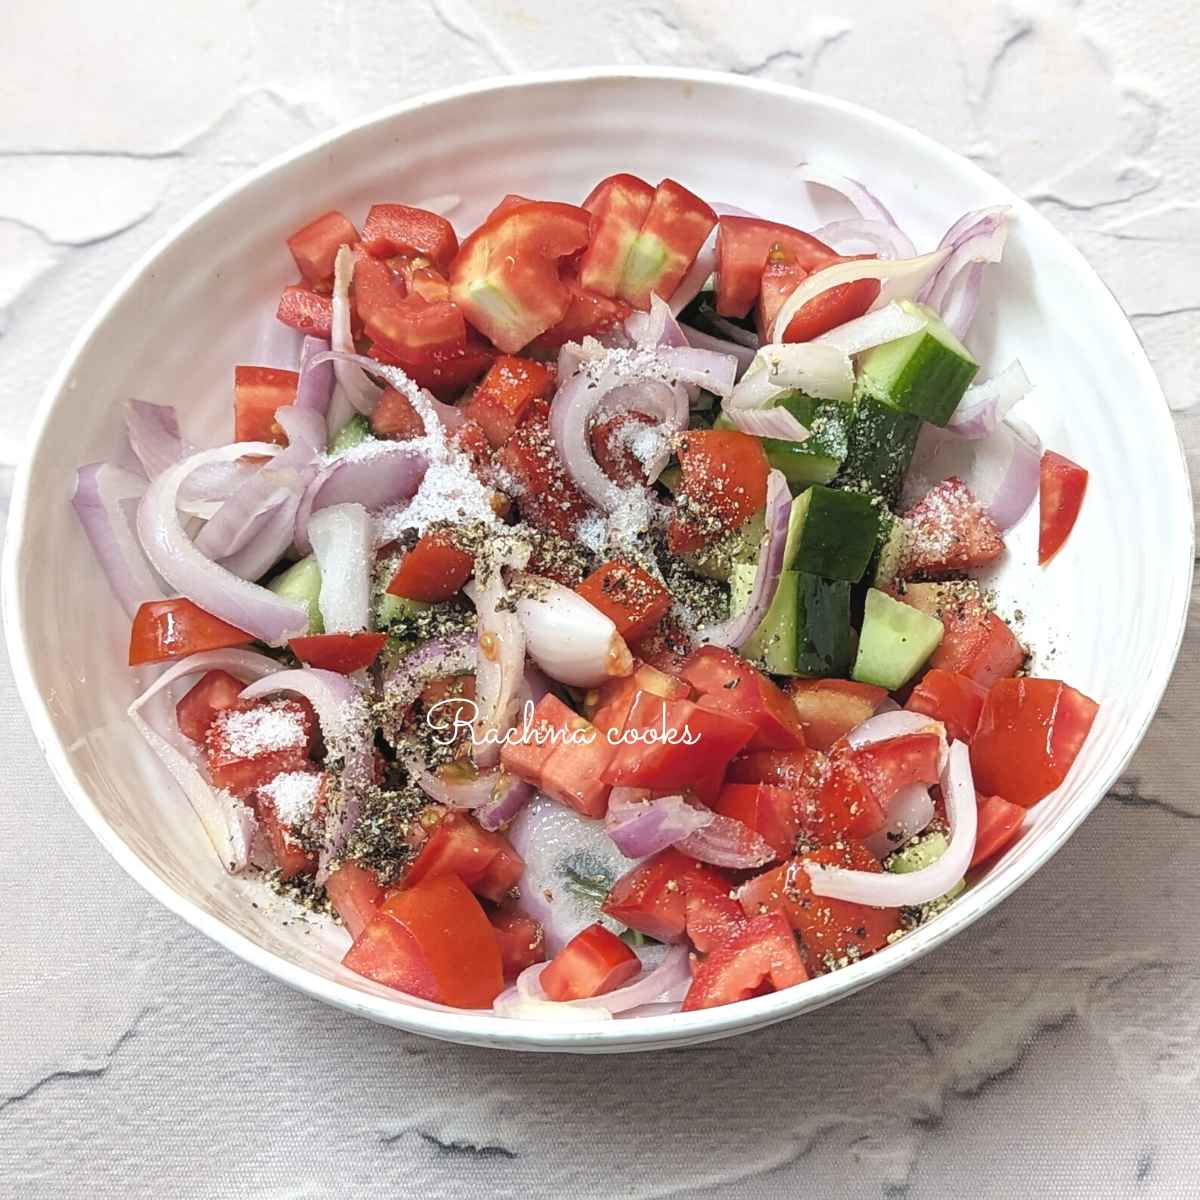 Diced tomato, cucumber and onions with salt, pepper and olive oil and red wine vinegar.